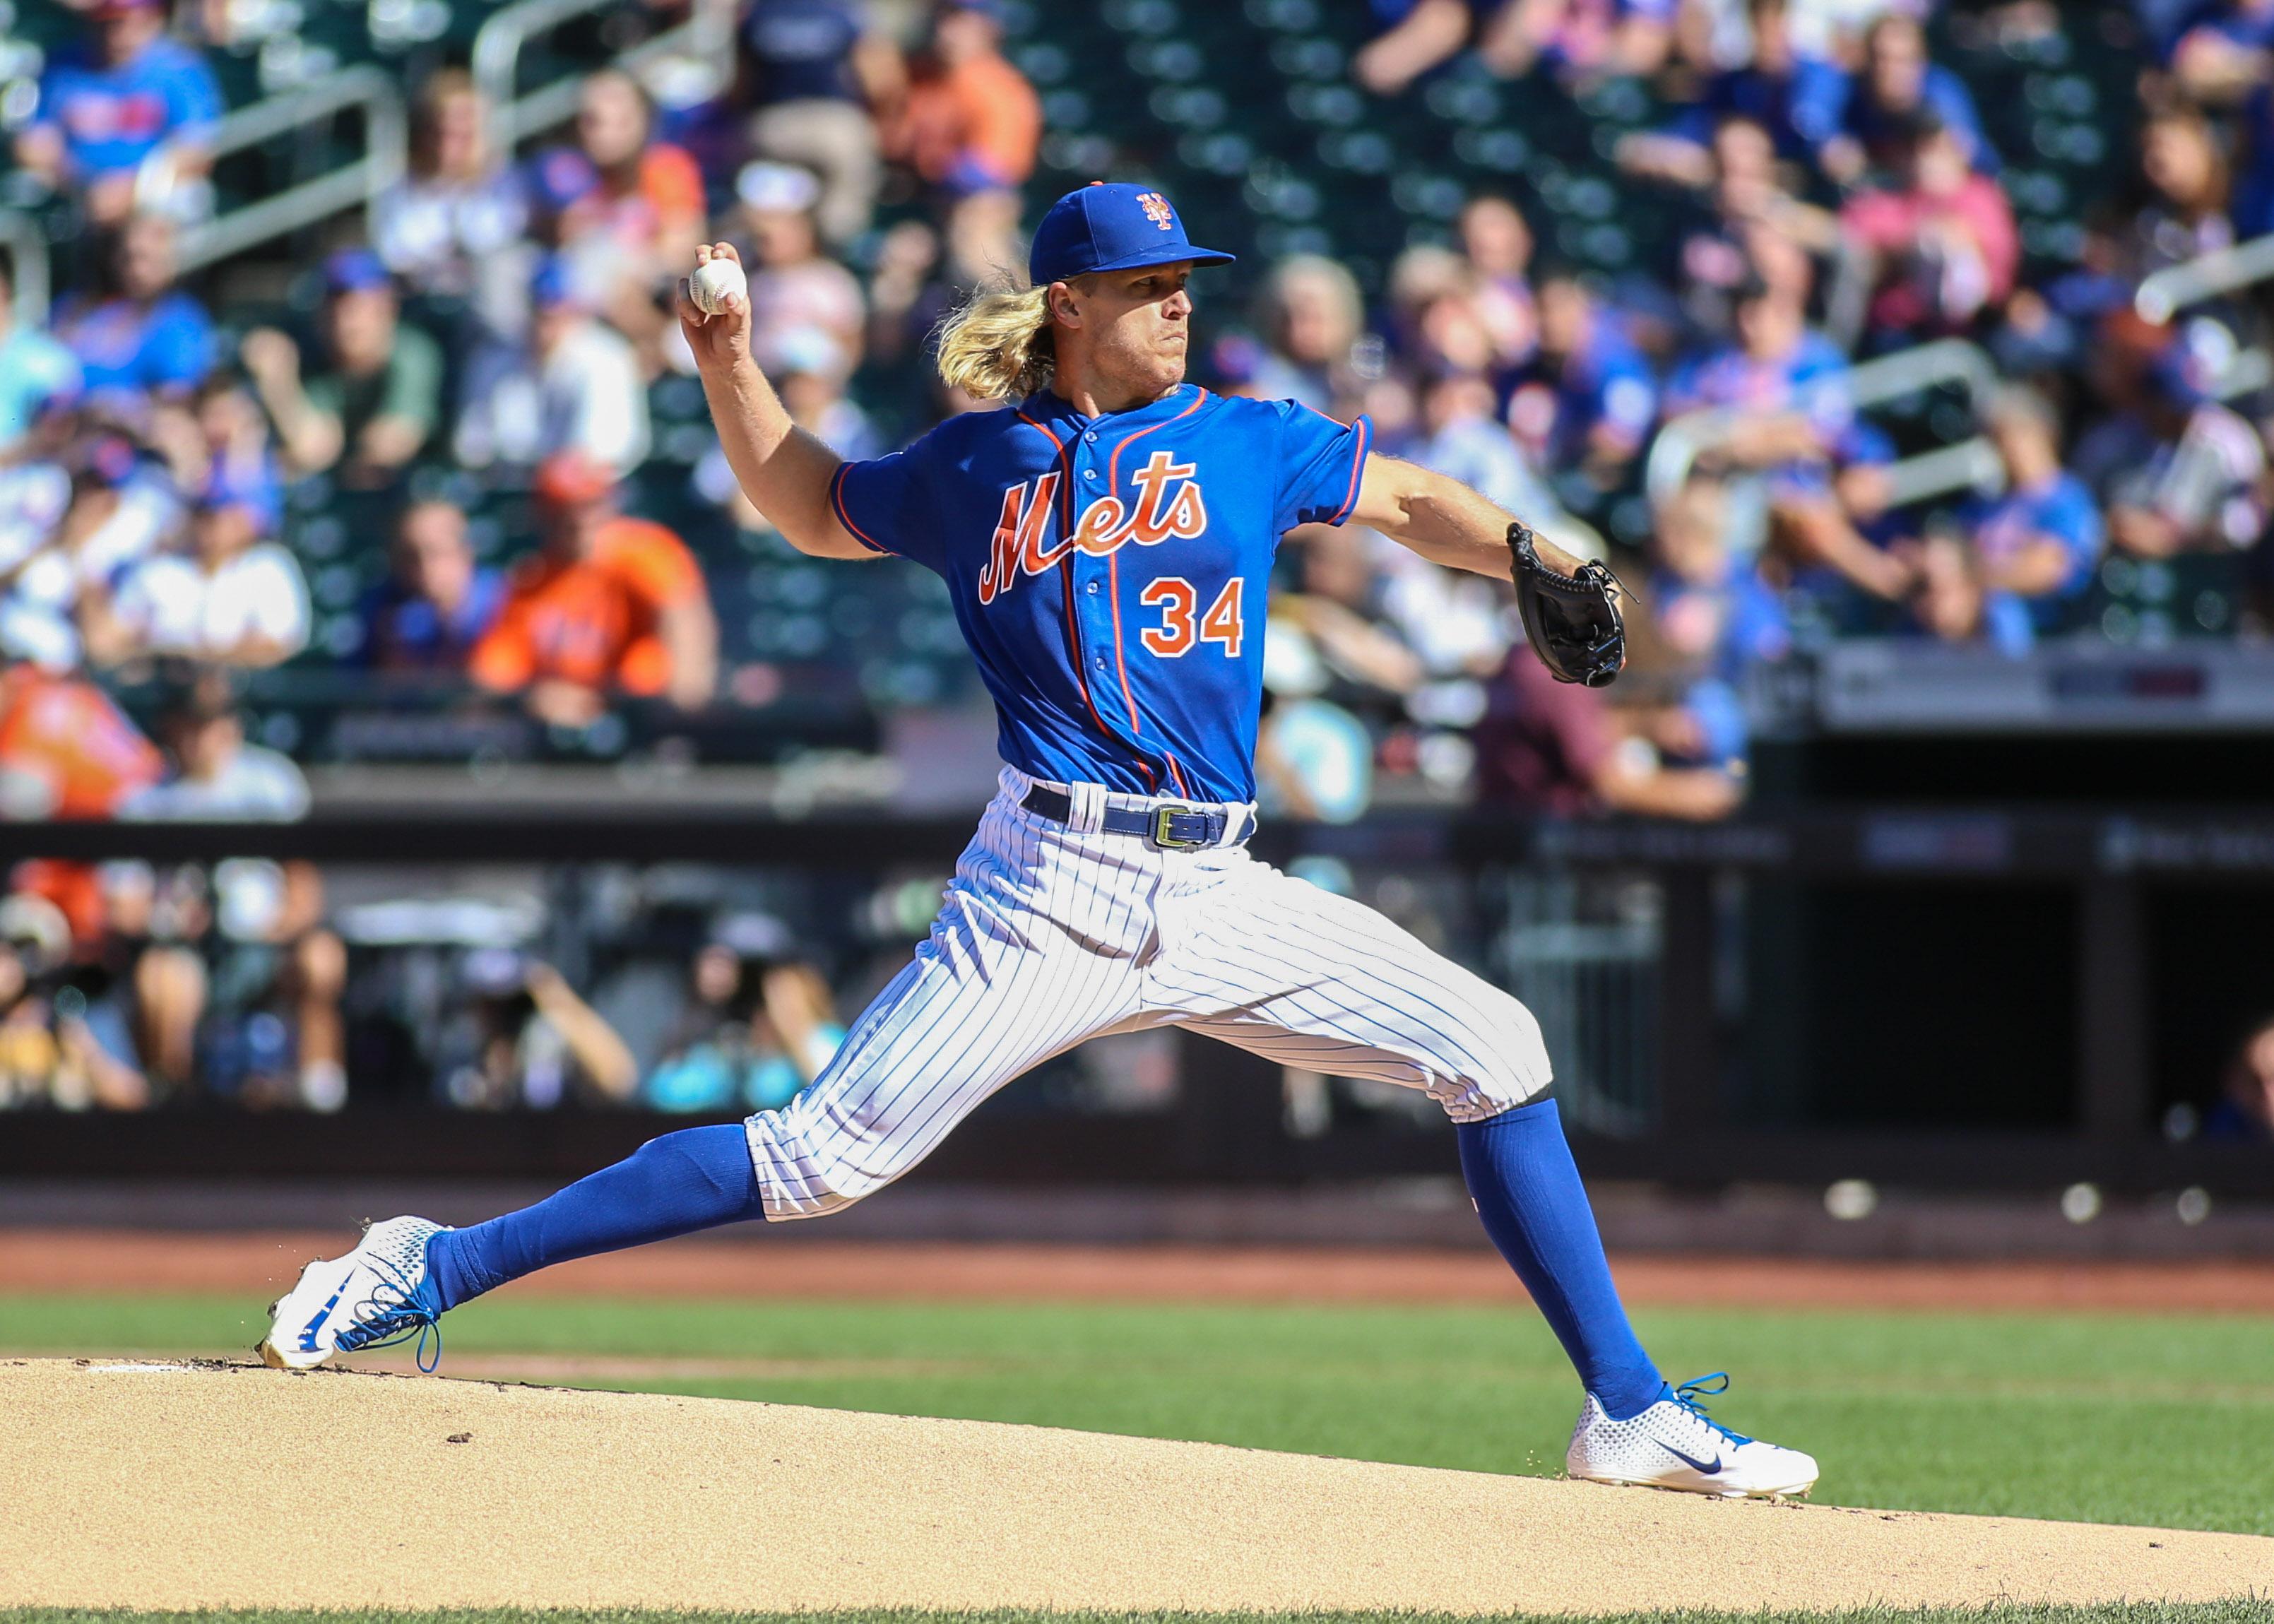 New York Mets pitcher Noah Syndergaard (34) at Citi Field. / Wendell Cruz/USA TODAY Sports